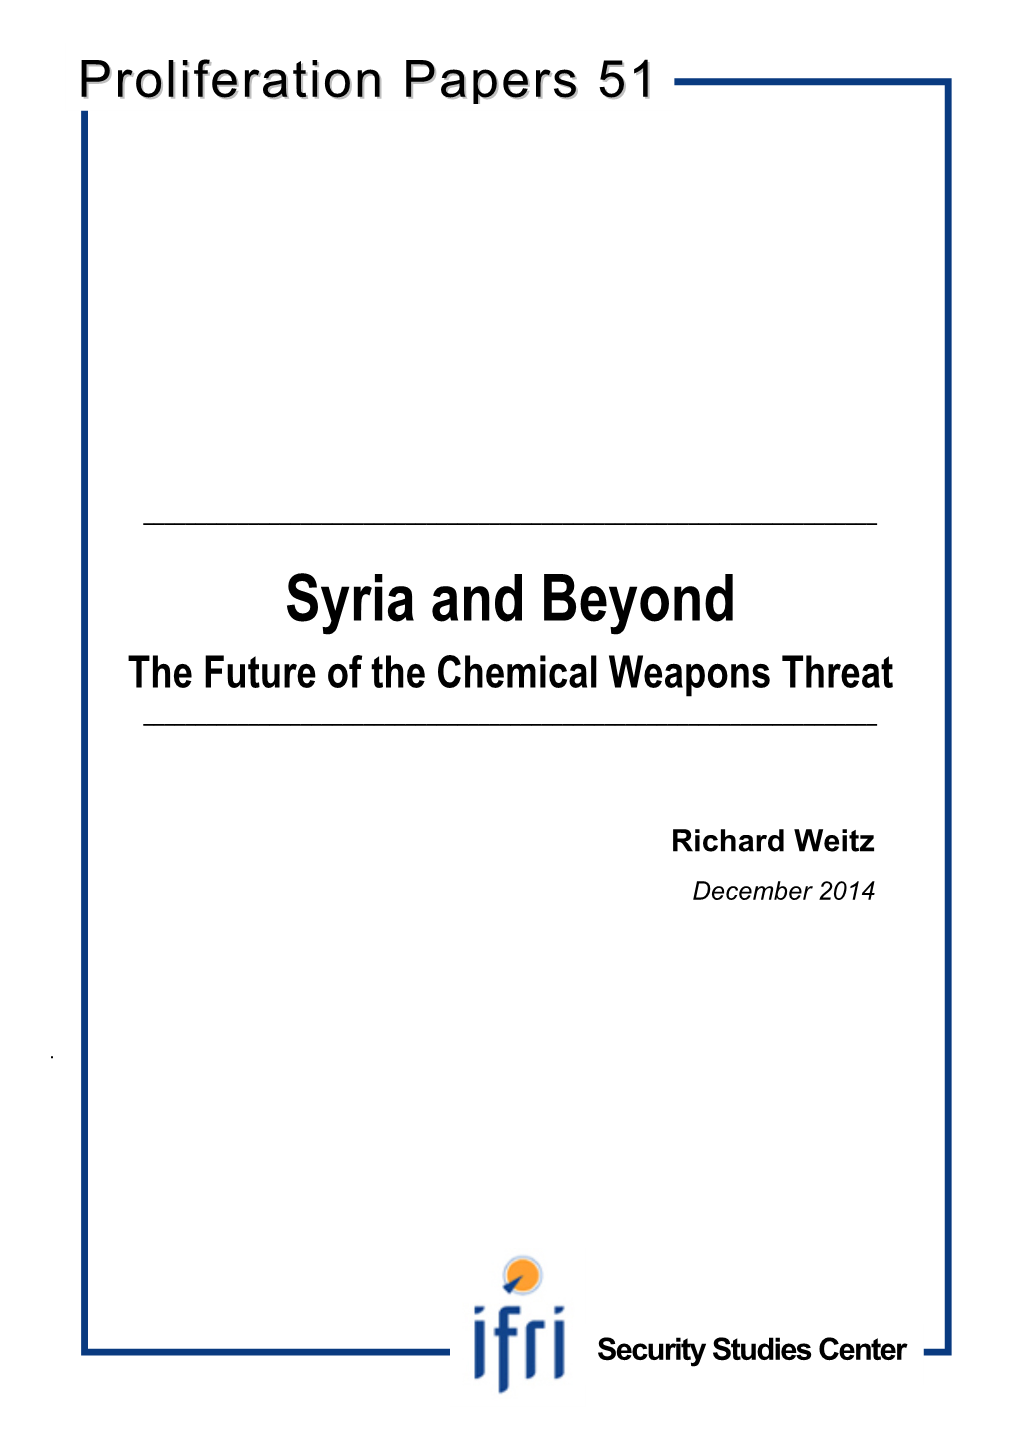 Of Chemical Weapons _____ 11